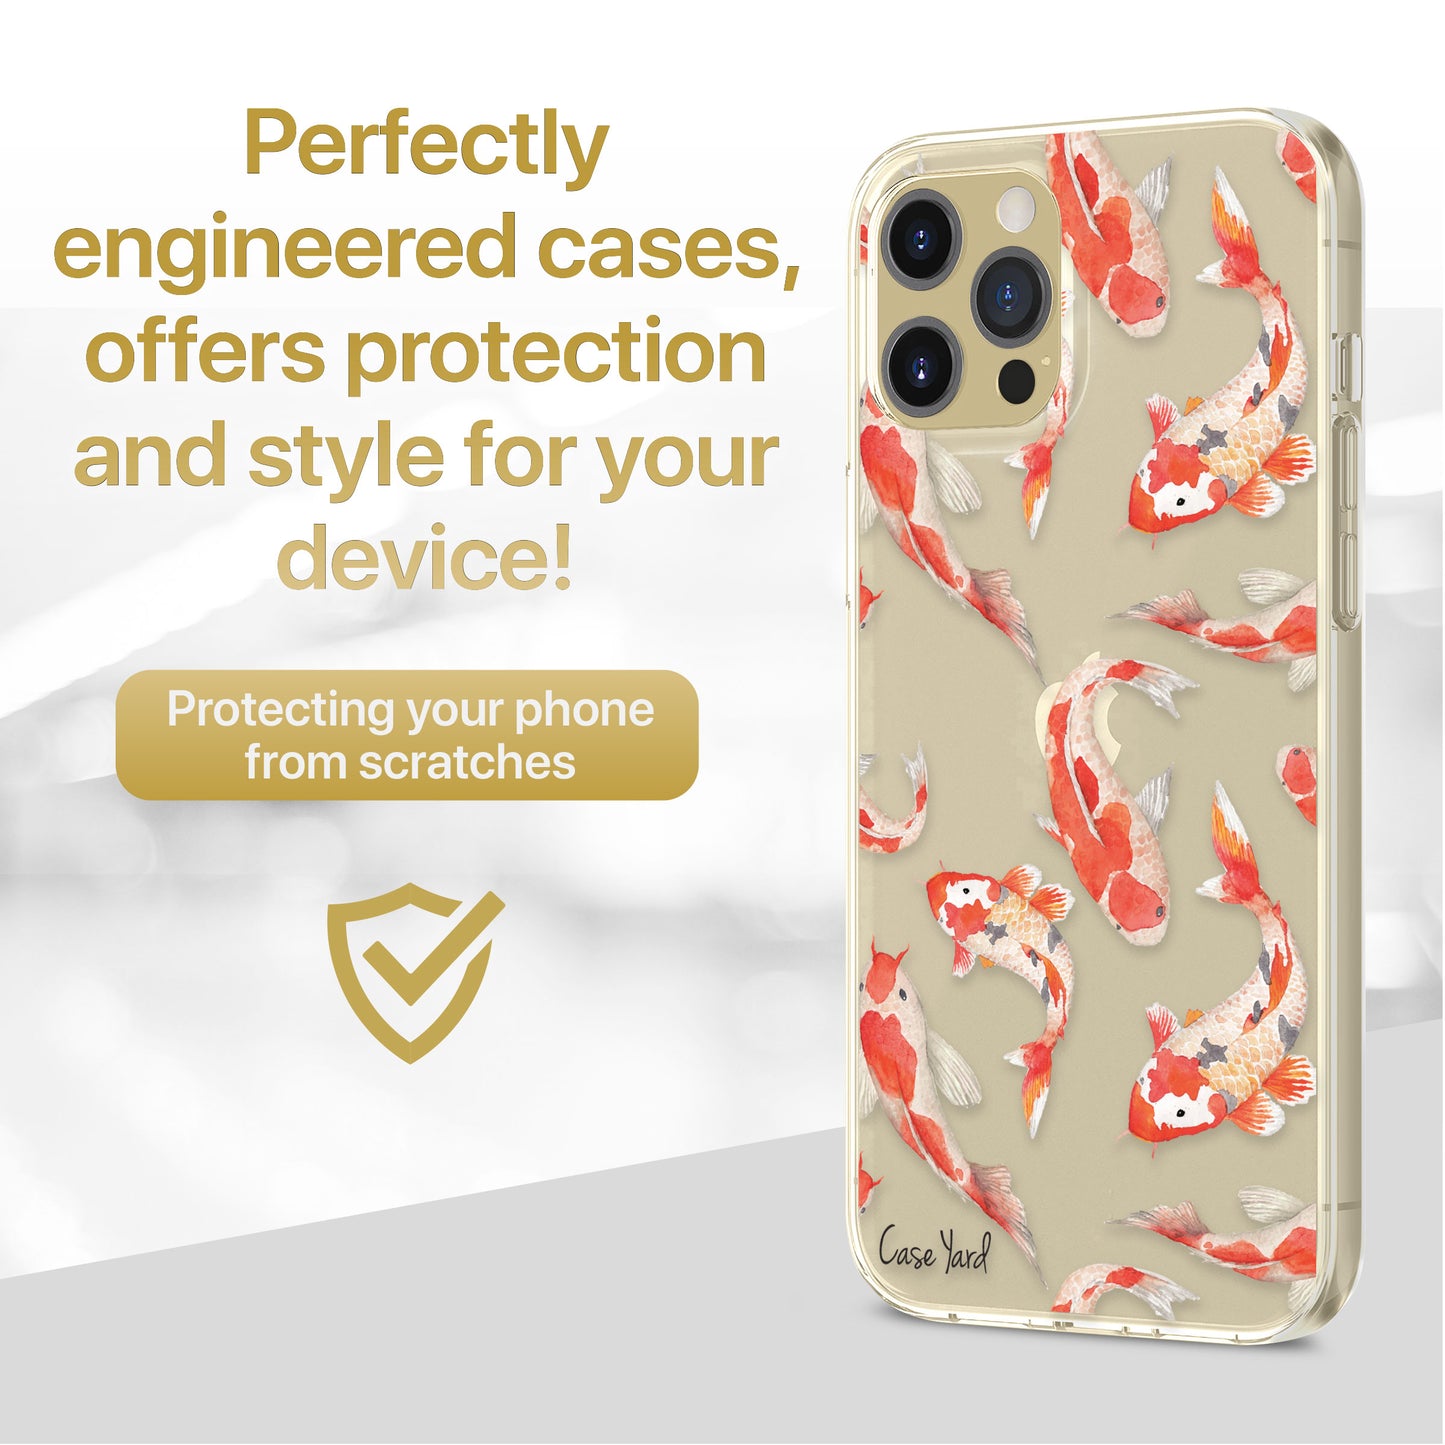 TPU Clear case with (Koi Fish Pond) Design for iPhone & Samsung Phones